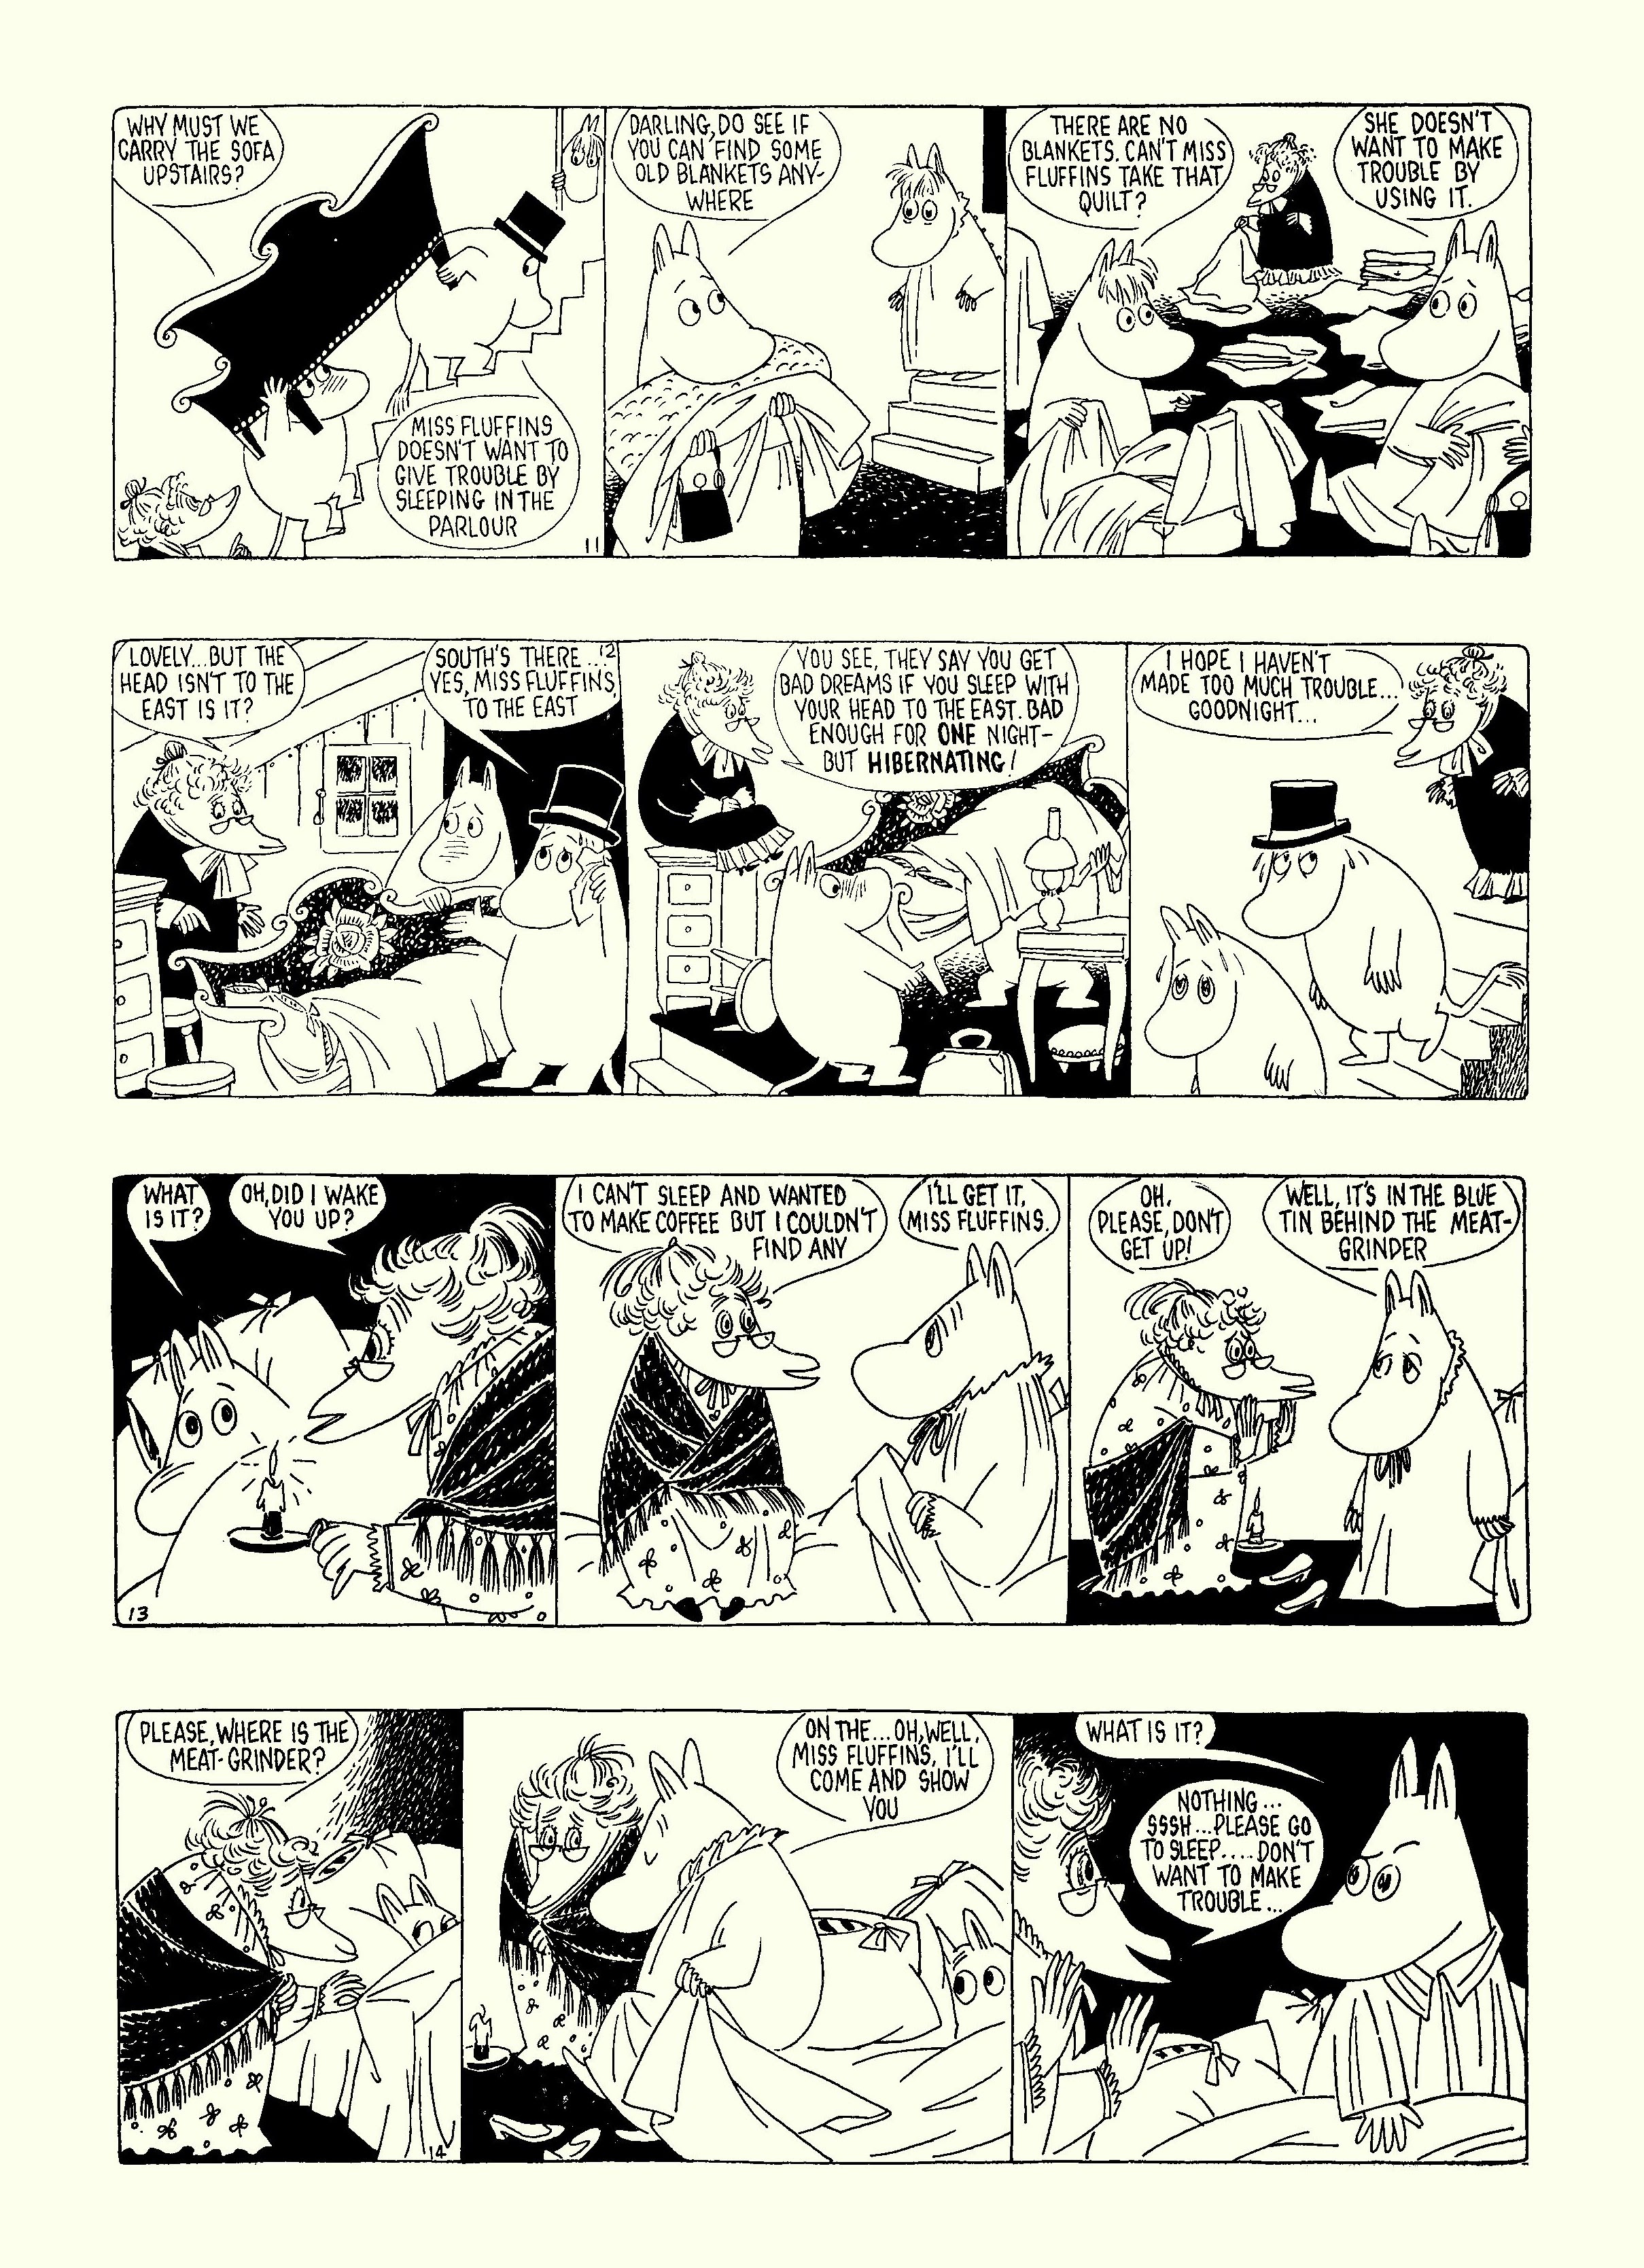 Read online Moomin: The Complete Tove Jansson Comic Strip comic -  Issue # TPB 5 - 9